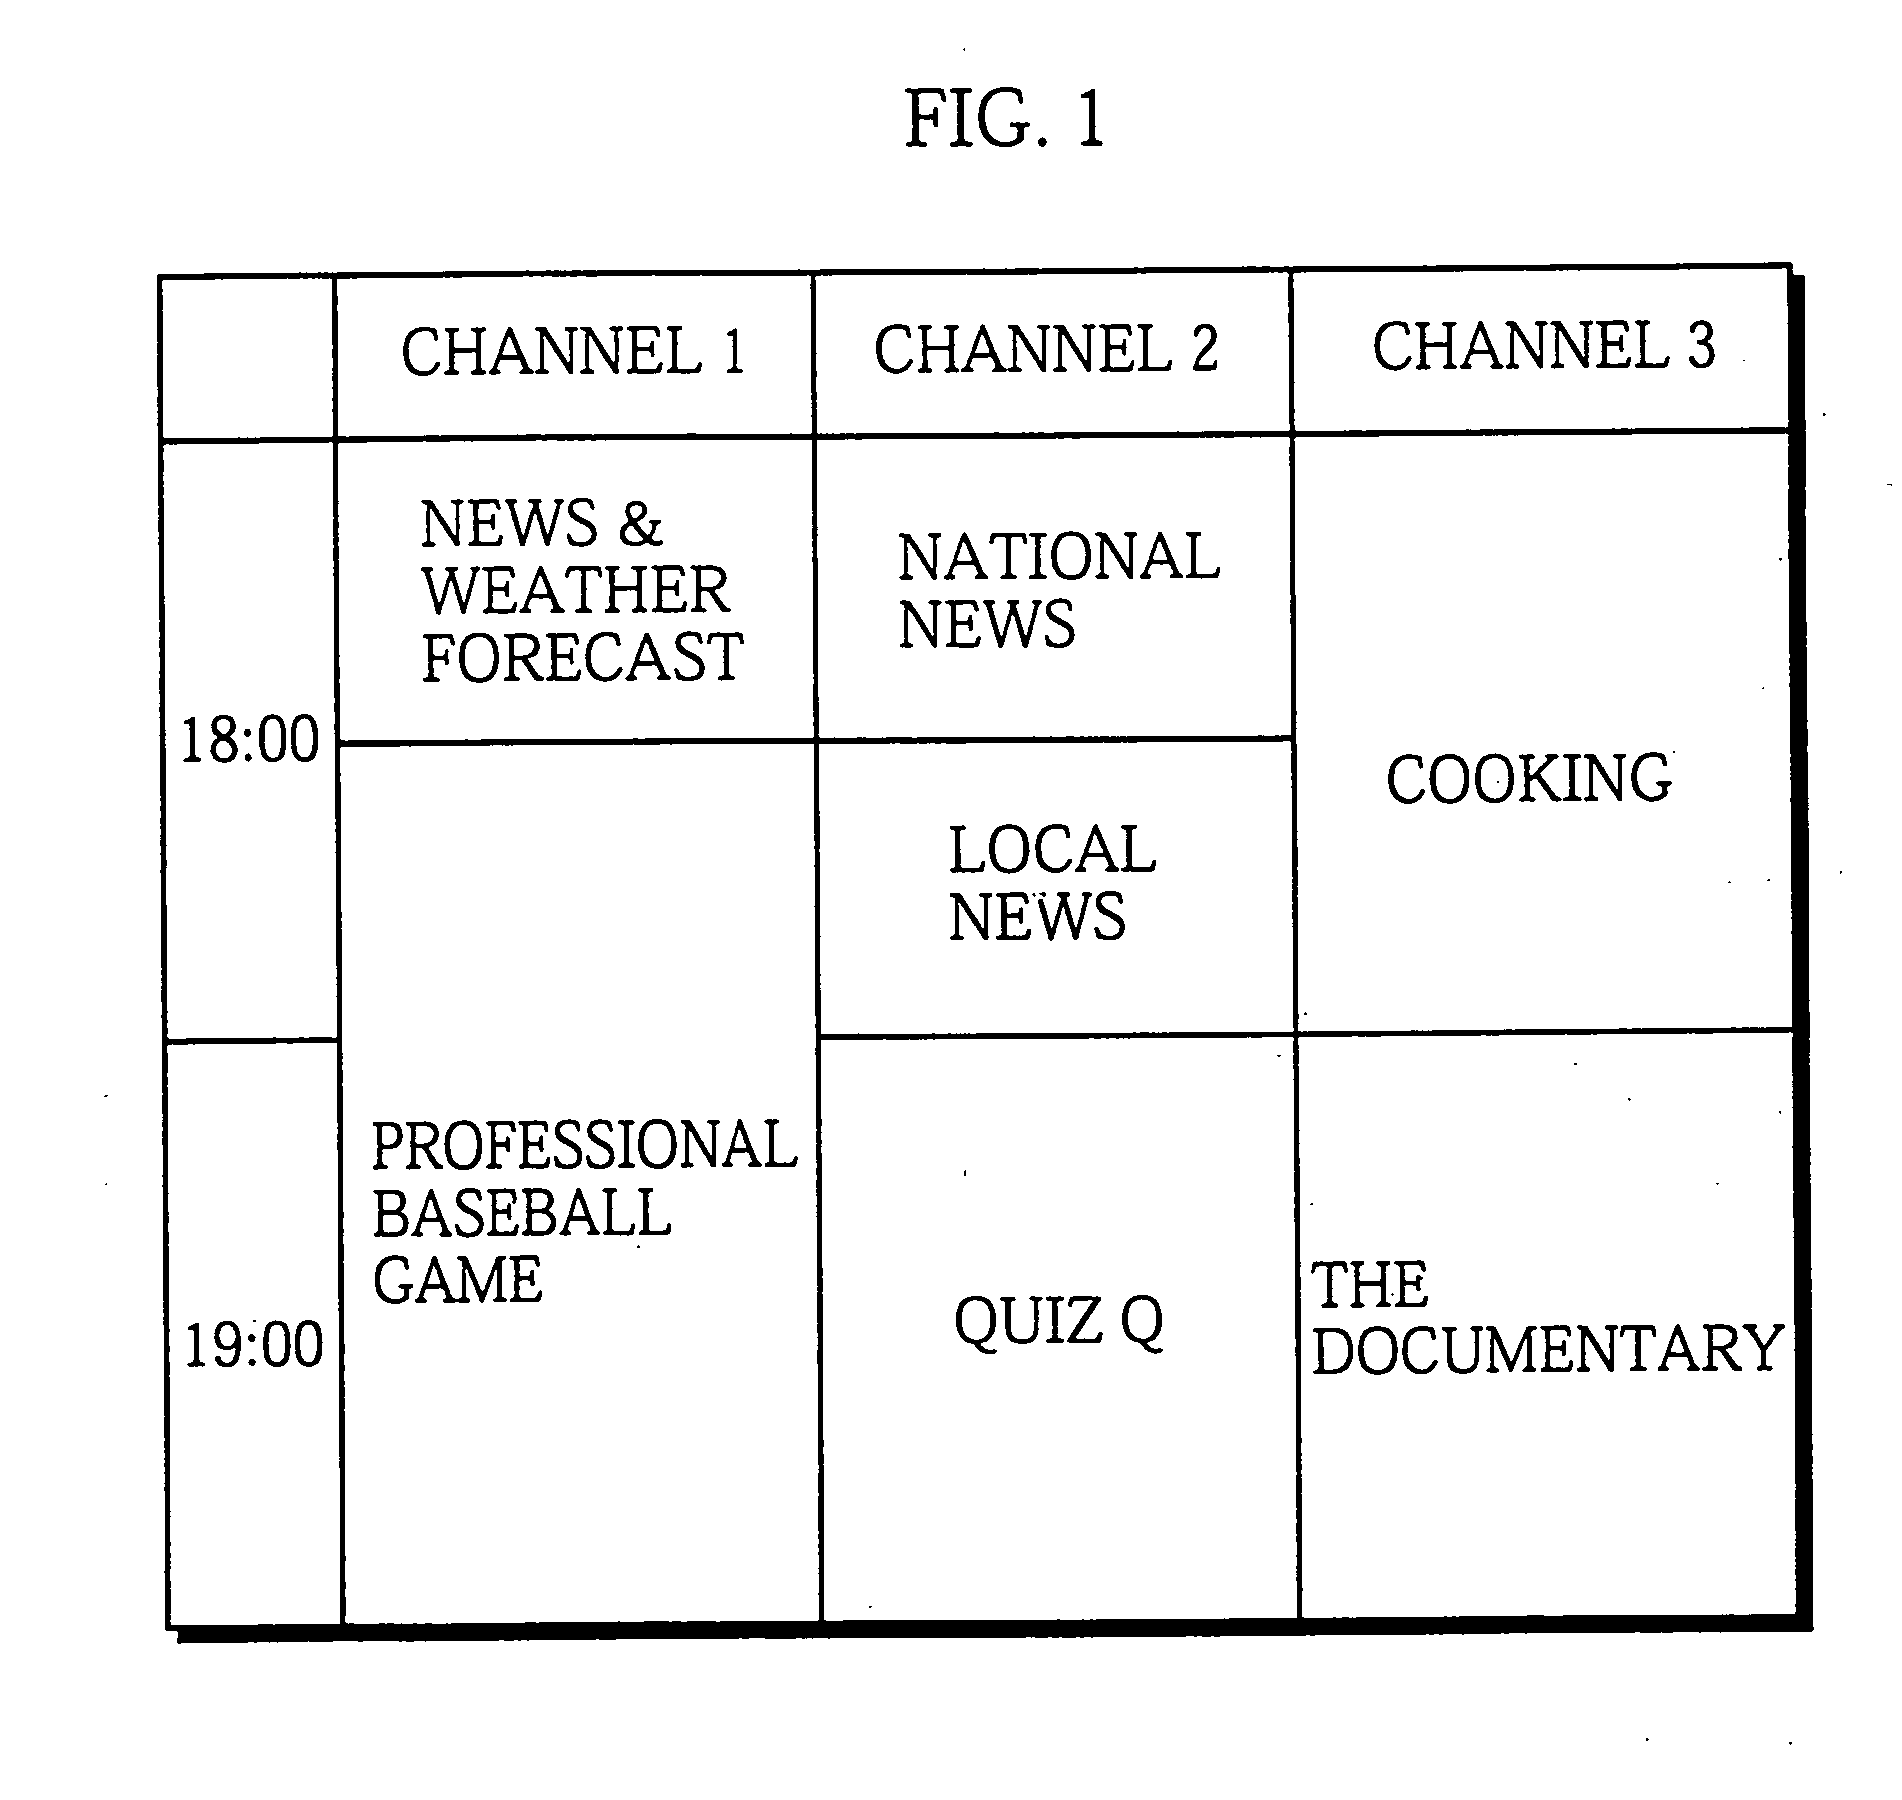 Program preselecting/recording apparatus for searching an electronic program guide for programs according to predetermined search criteria